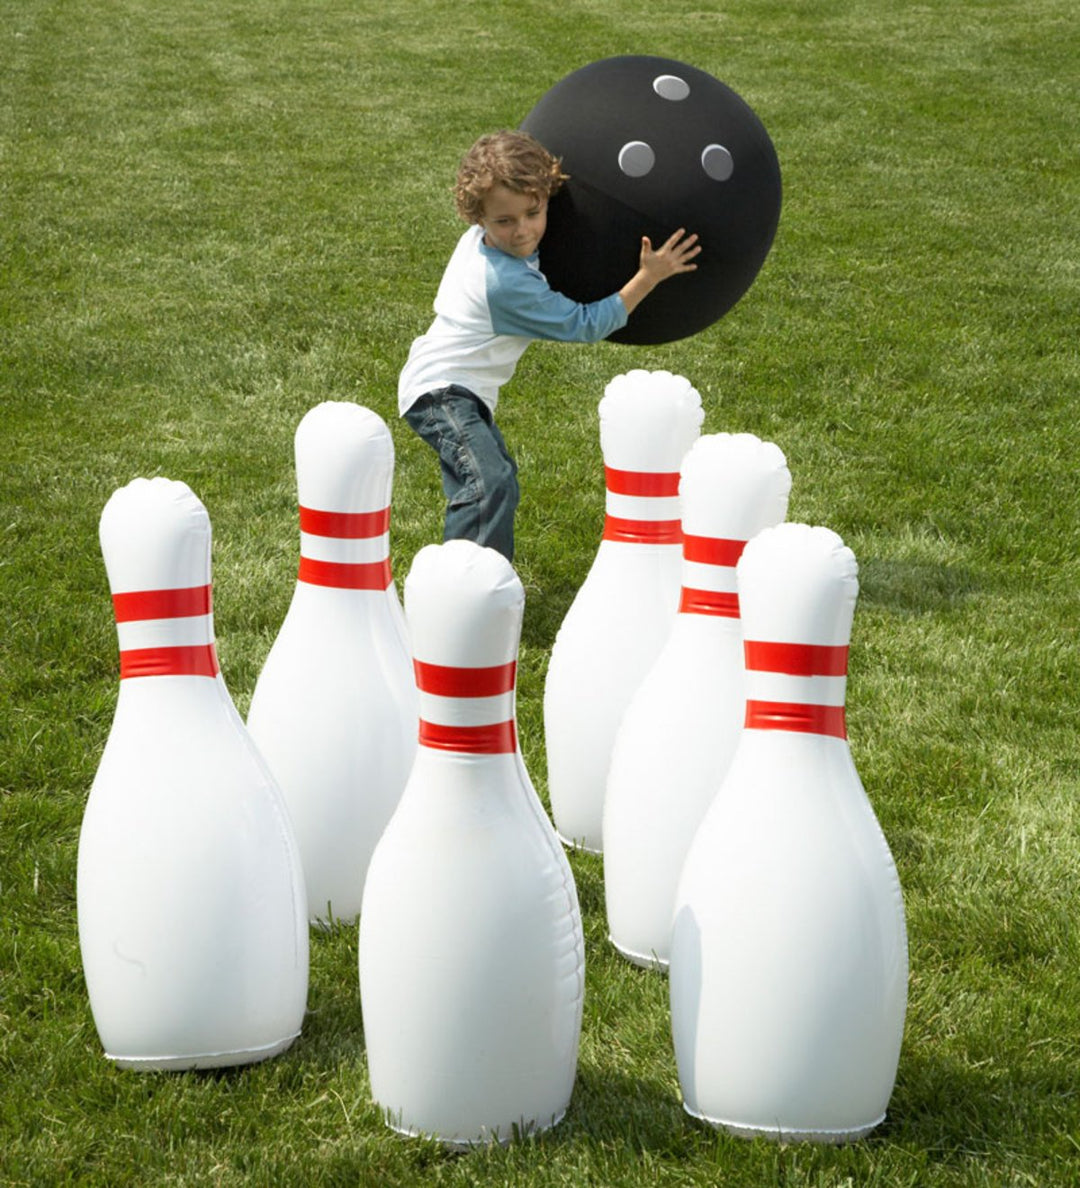 Evergreen / Hearthsong Toy Outdoor Fun Giant Bowling Game